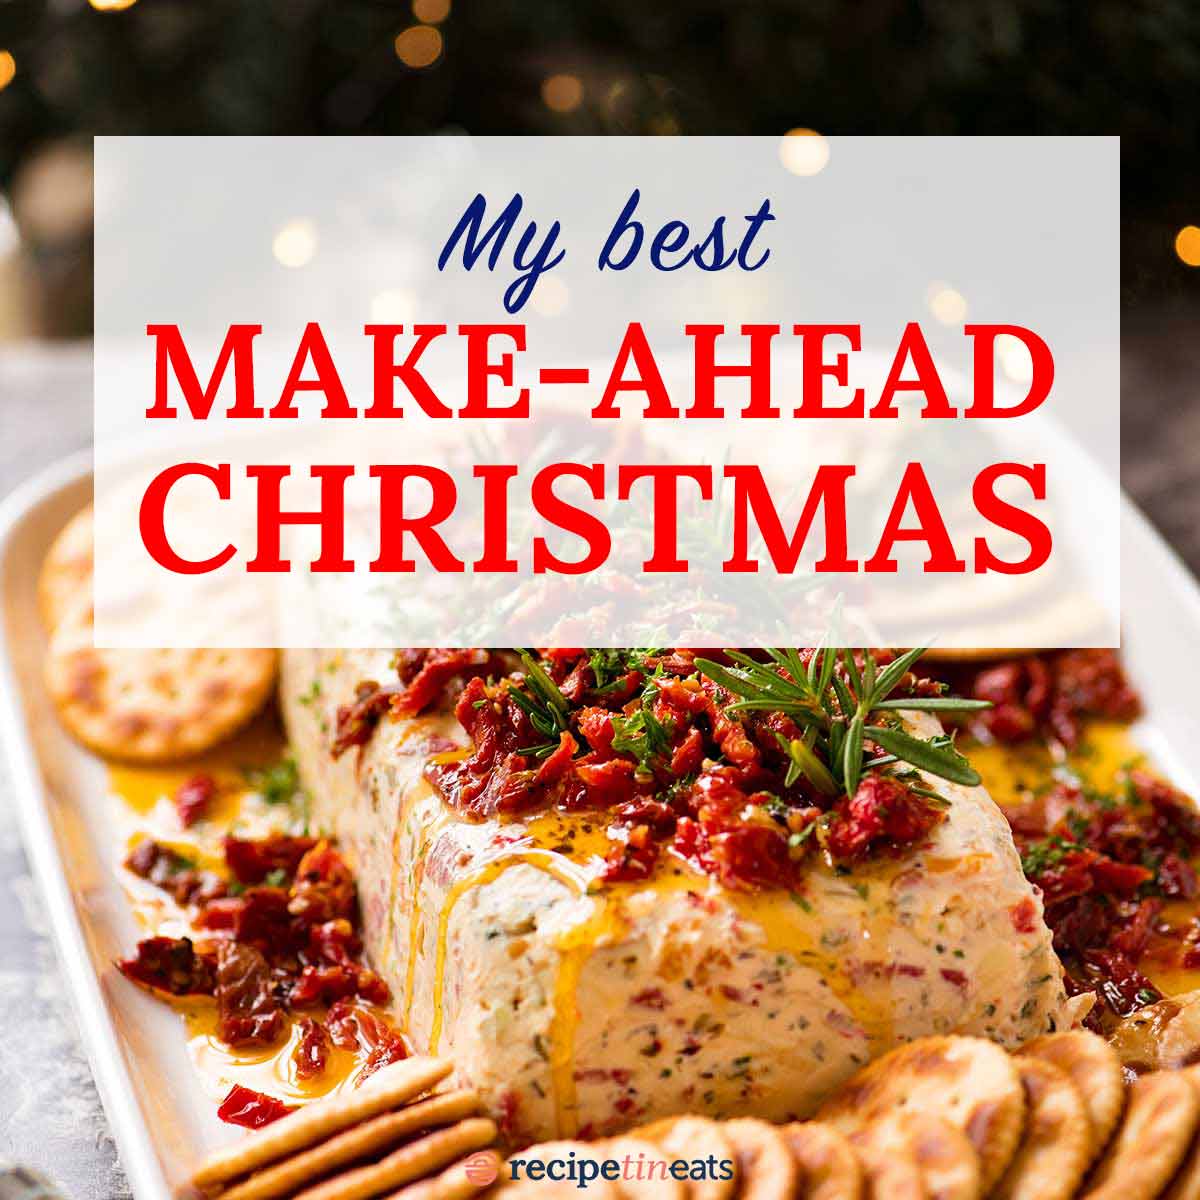 Best Kitchen Gifts for Christmas - Home Sweet Table - Healthy, fresh, and  simple family-friendly recipes